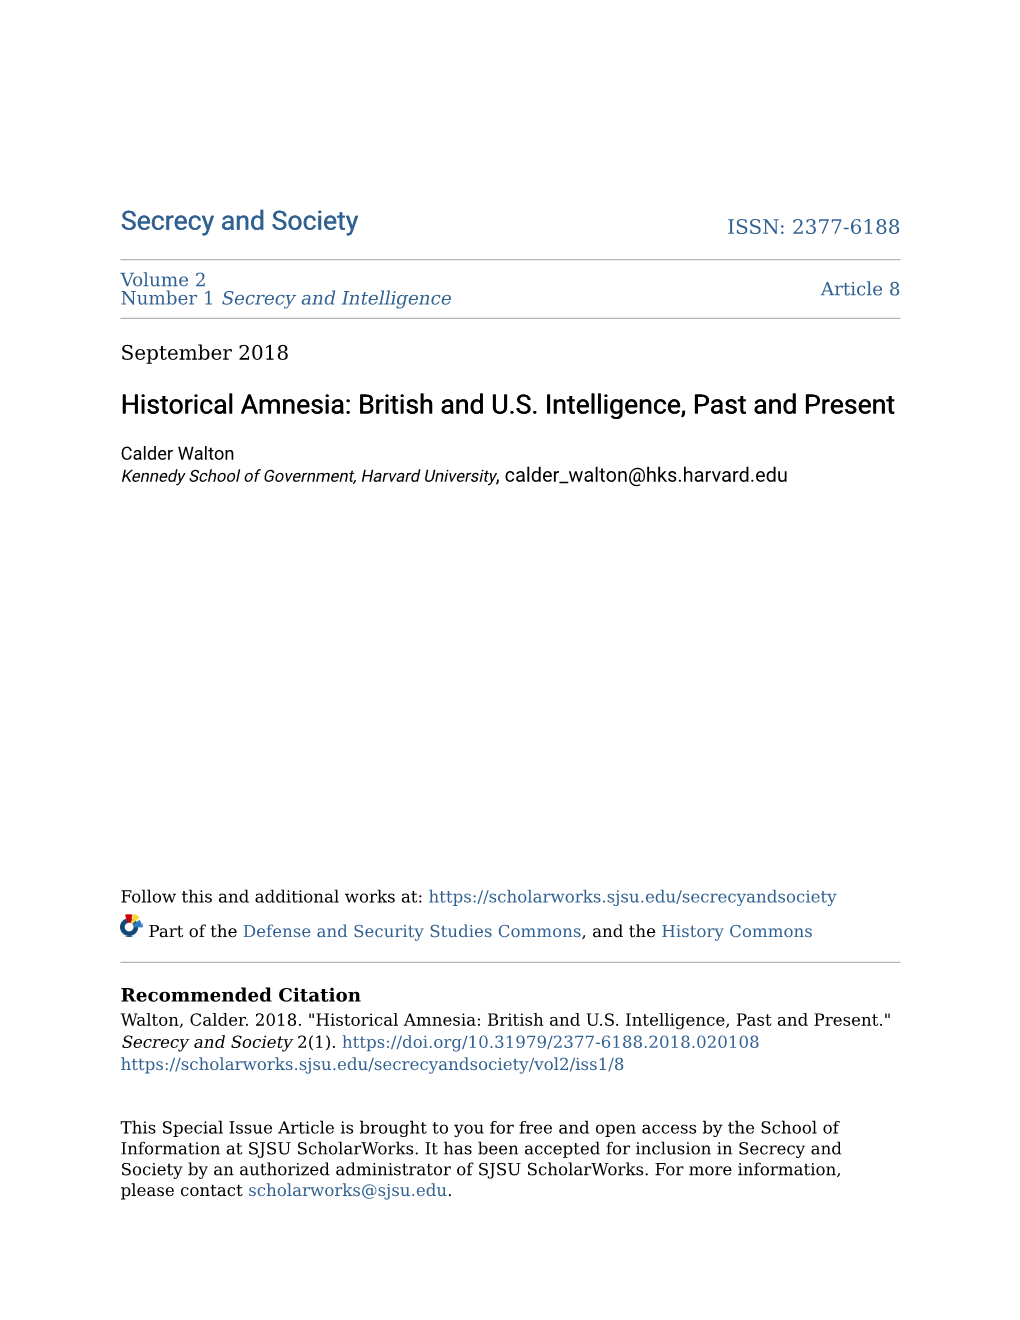 British and US Intelligence, Past and Present